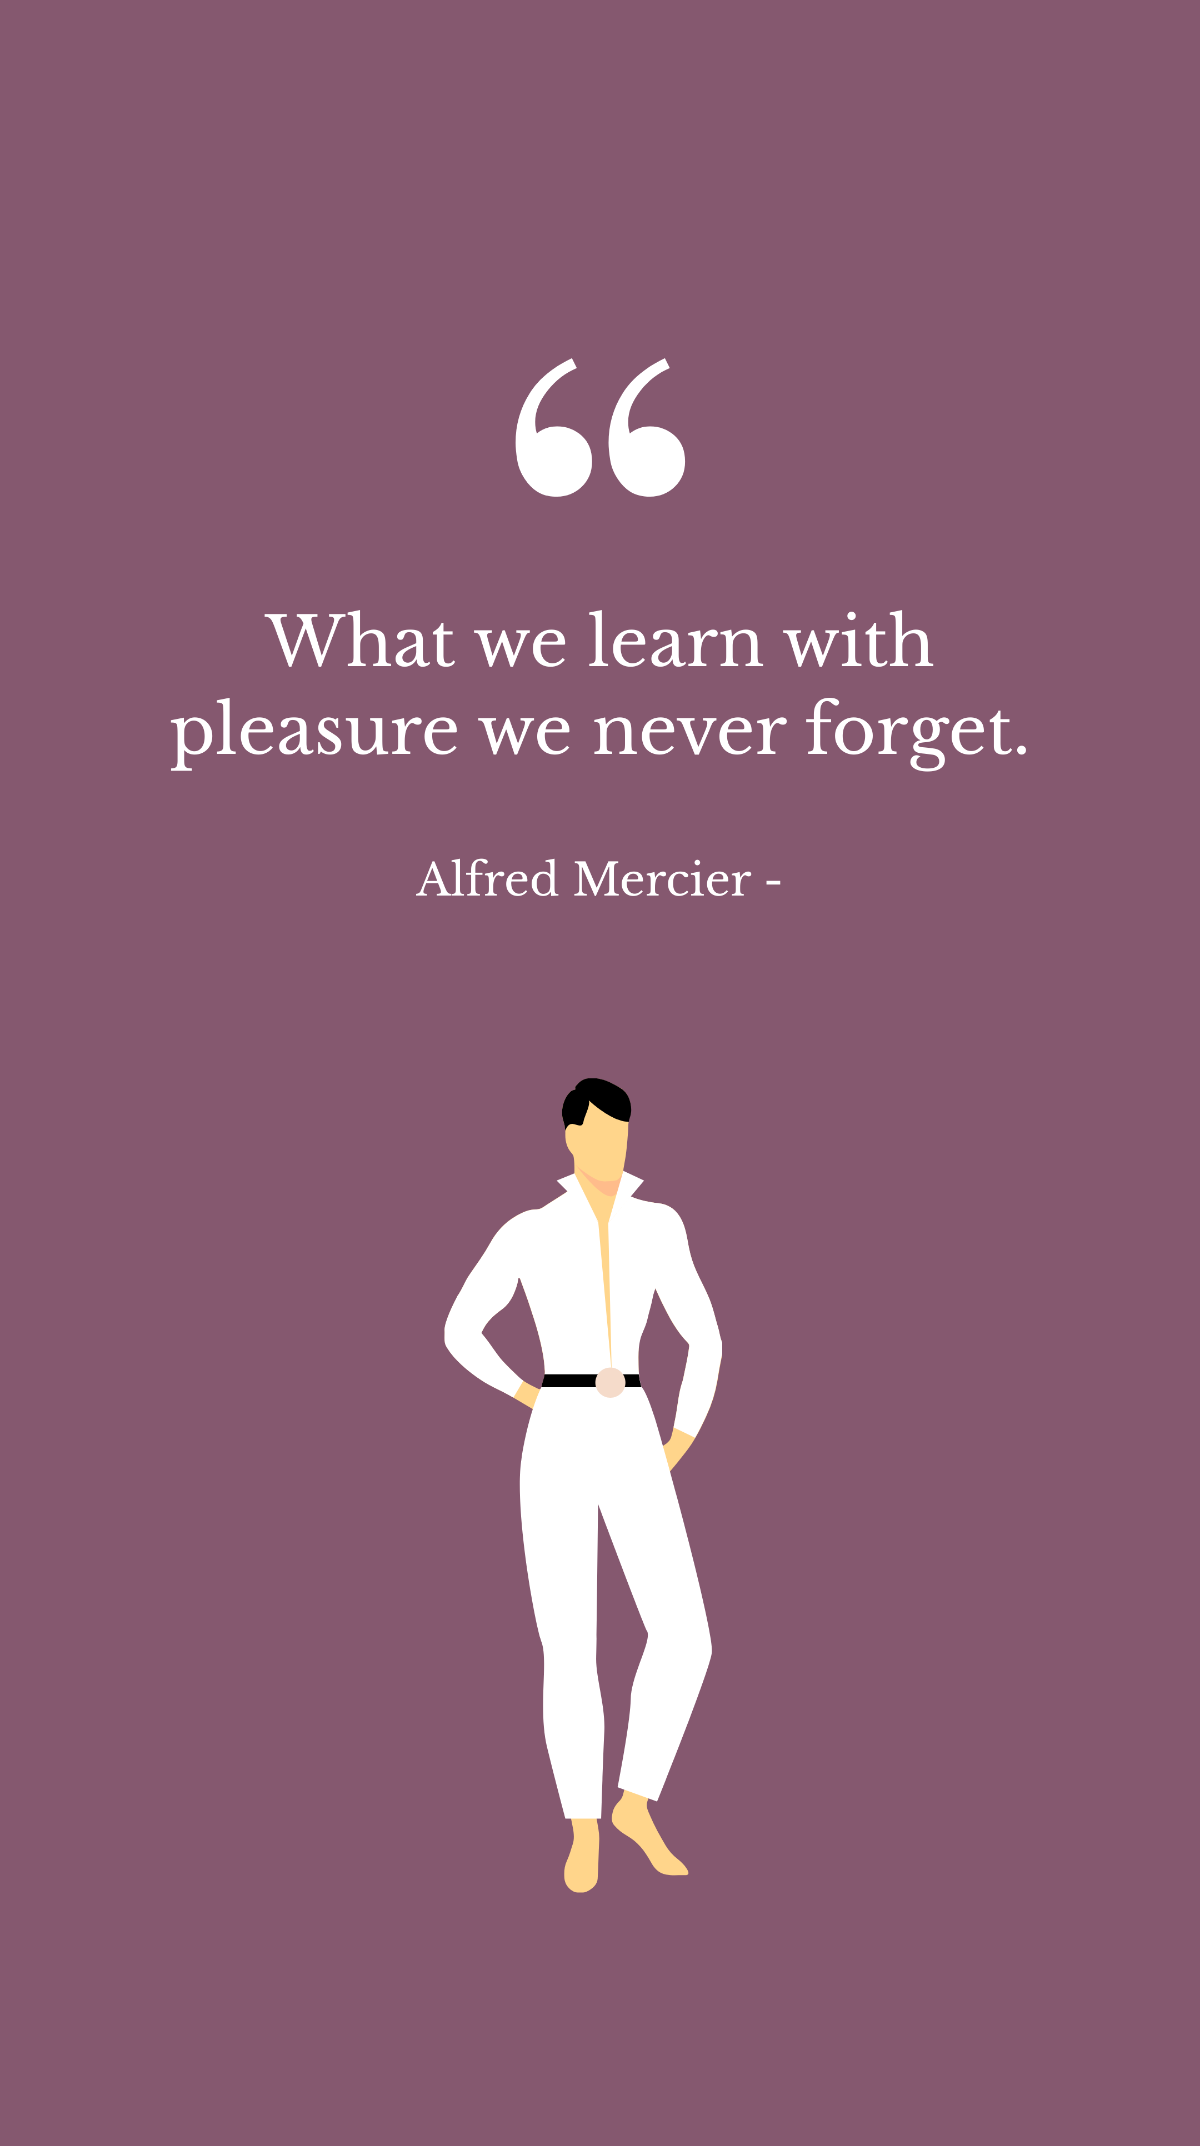 Alfred Mercier - What we learn with pleasure we never forget.